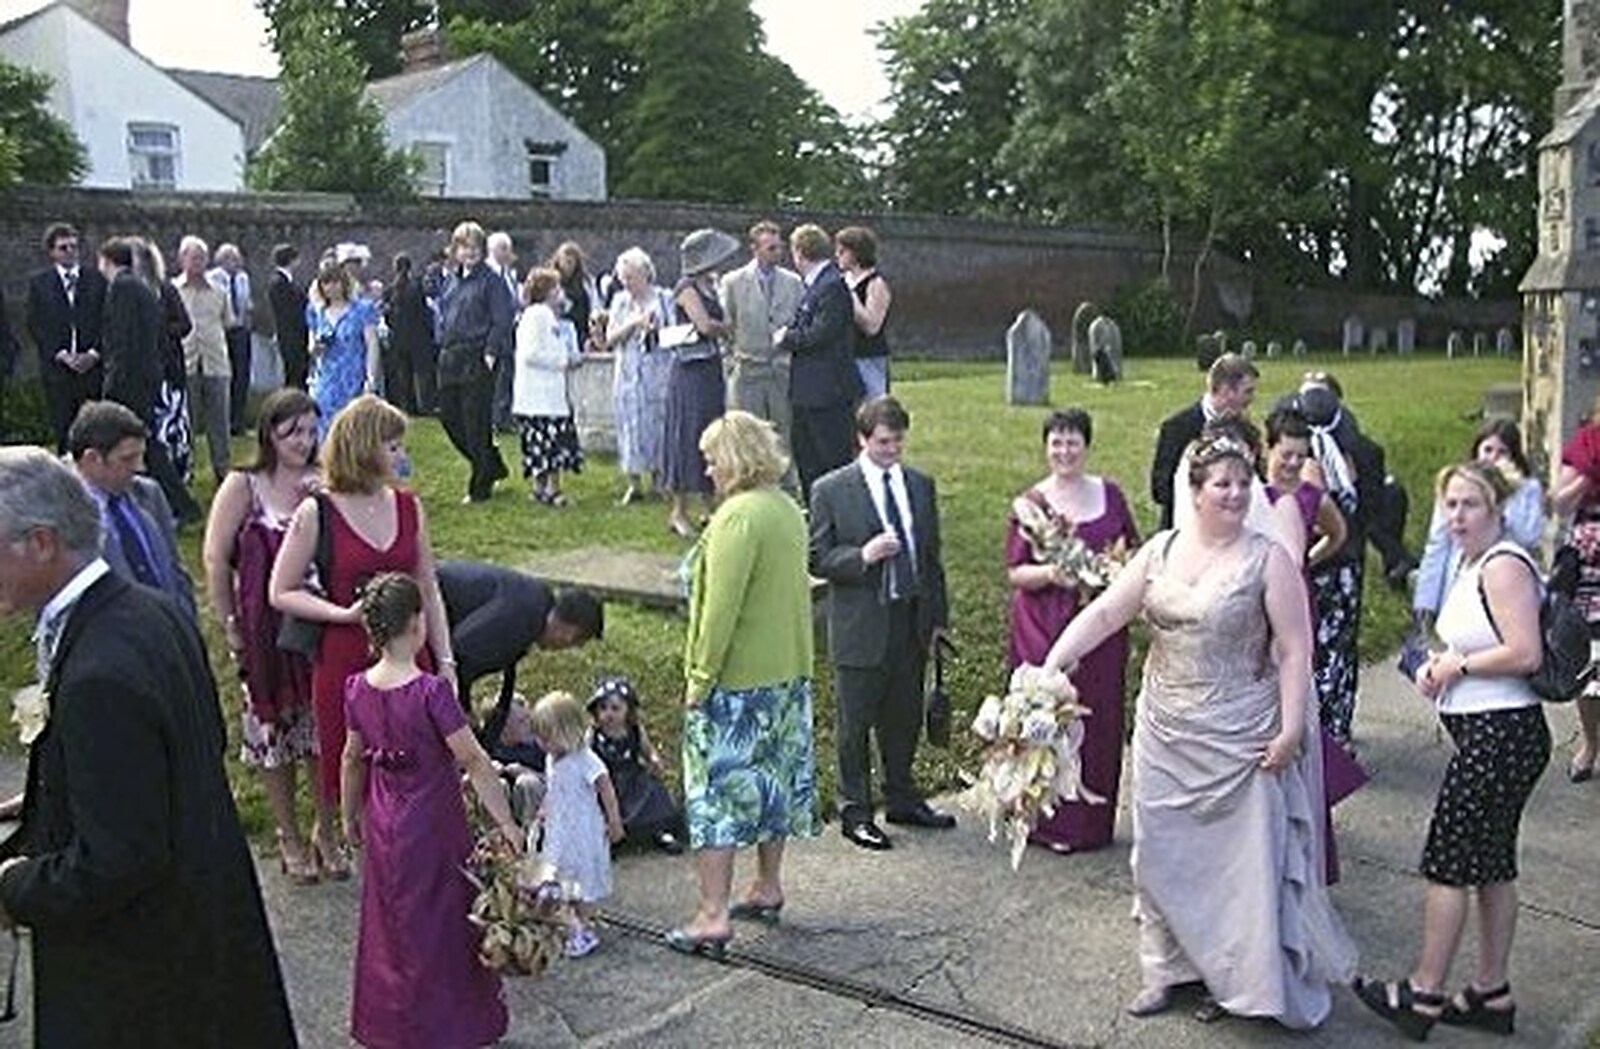 Guests mingle around outside the church from Phil and Lisa's Wedding, Woolverston Hall, Ipswich, Suffolk - 1st July 2001